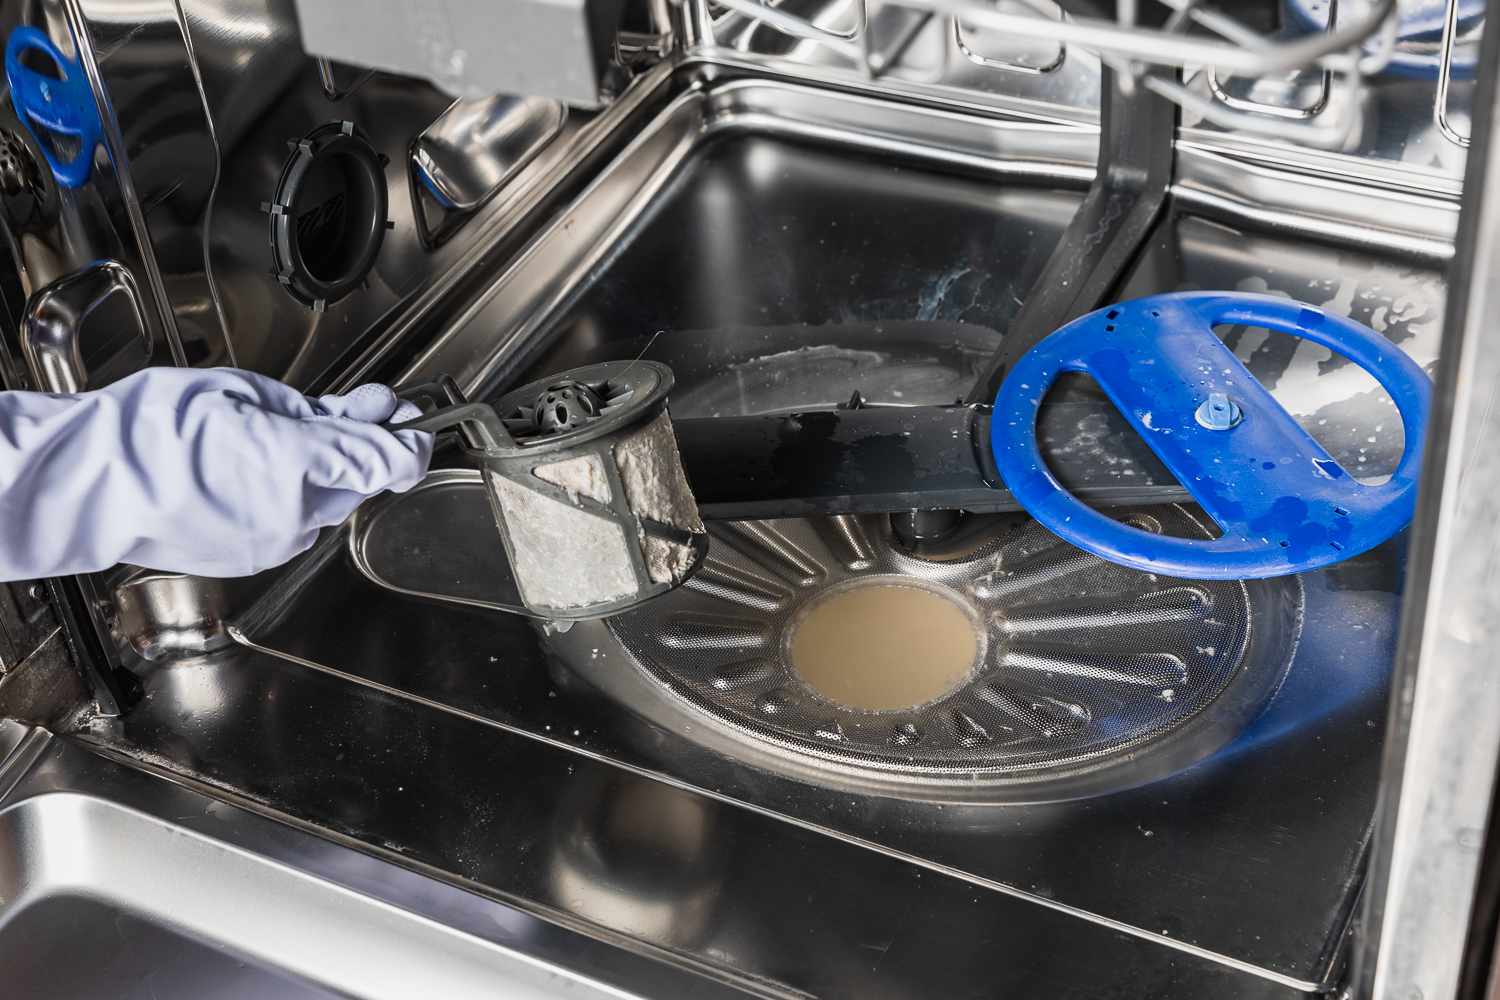 How To Unclog Dishwasher Drain